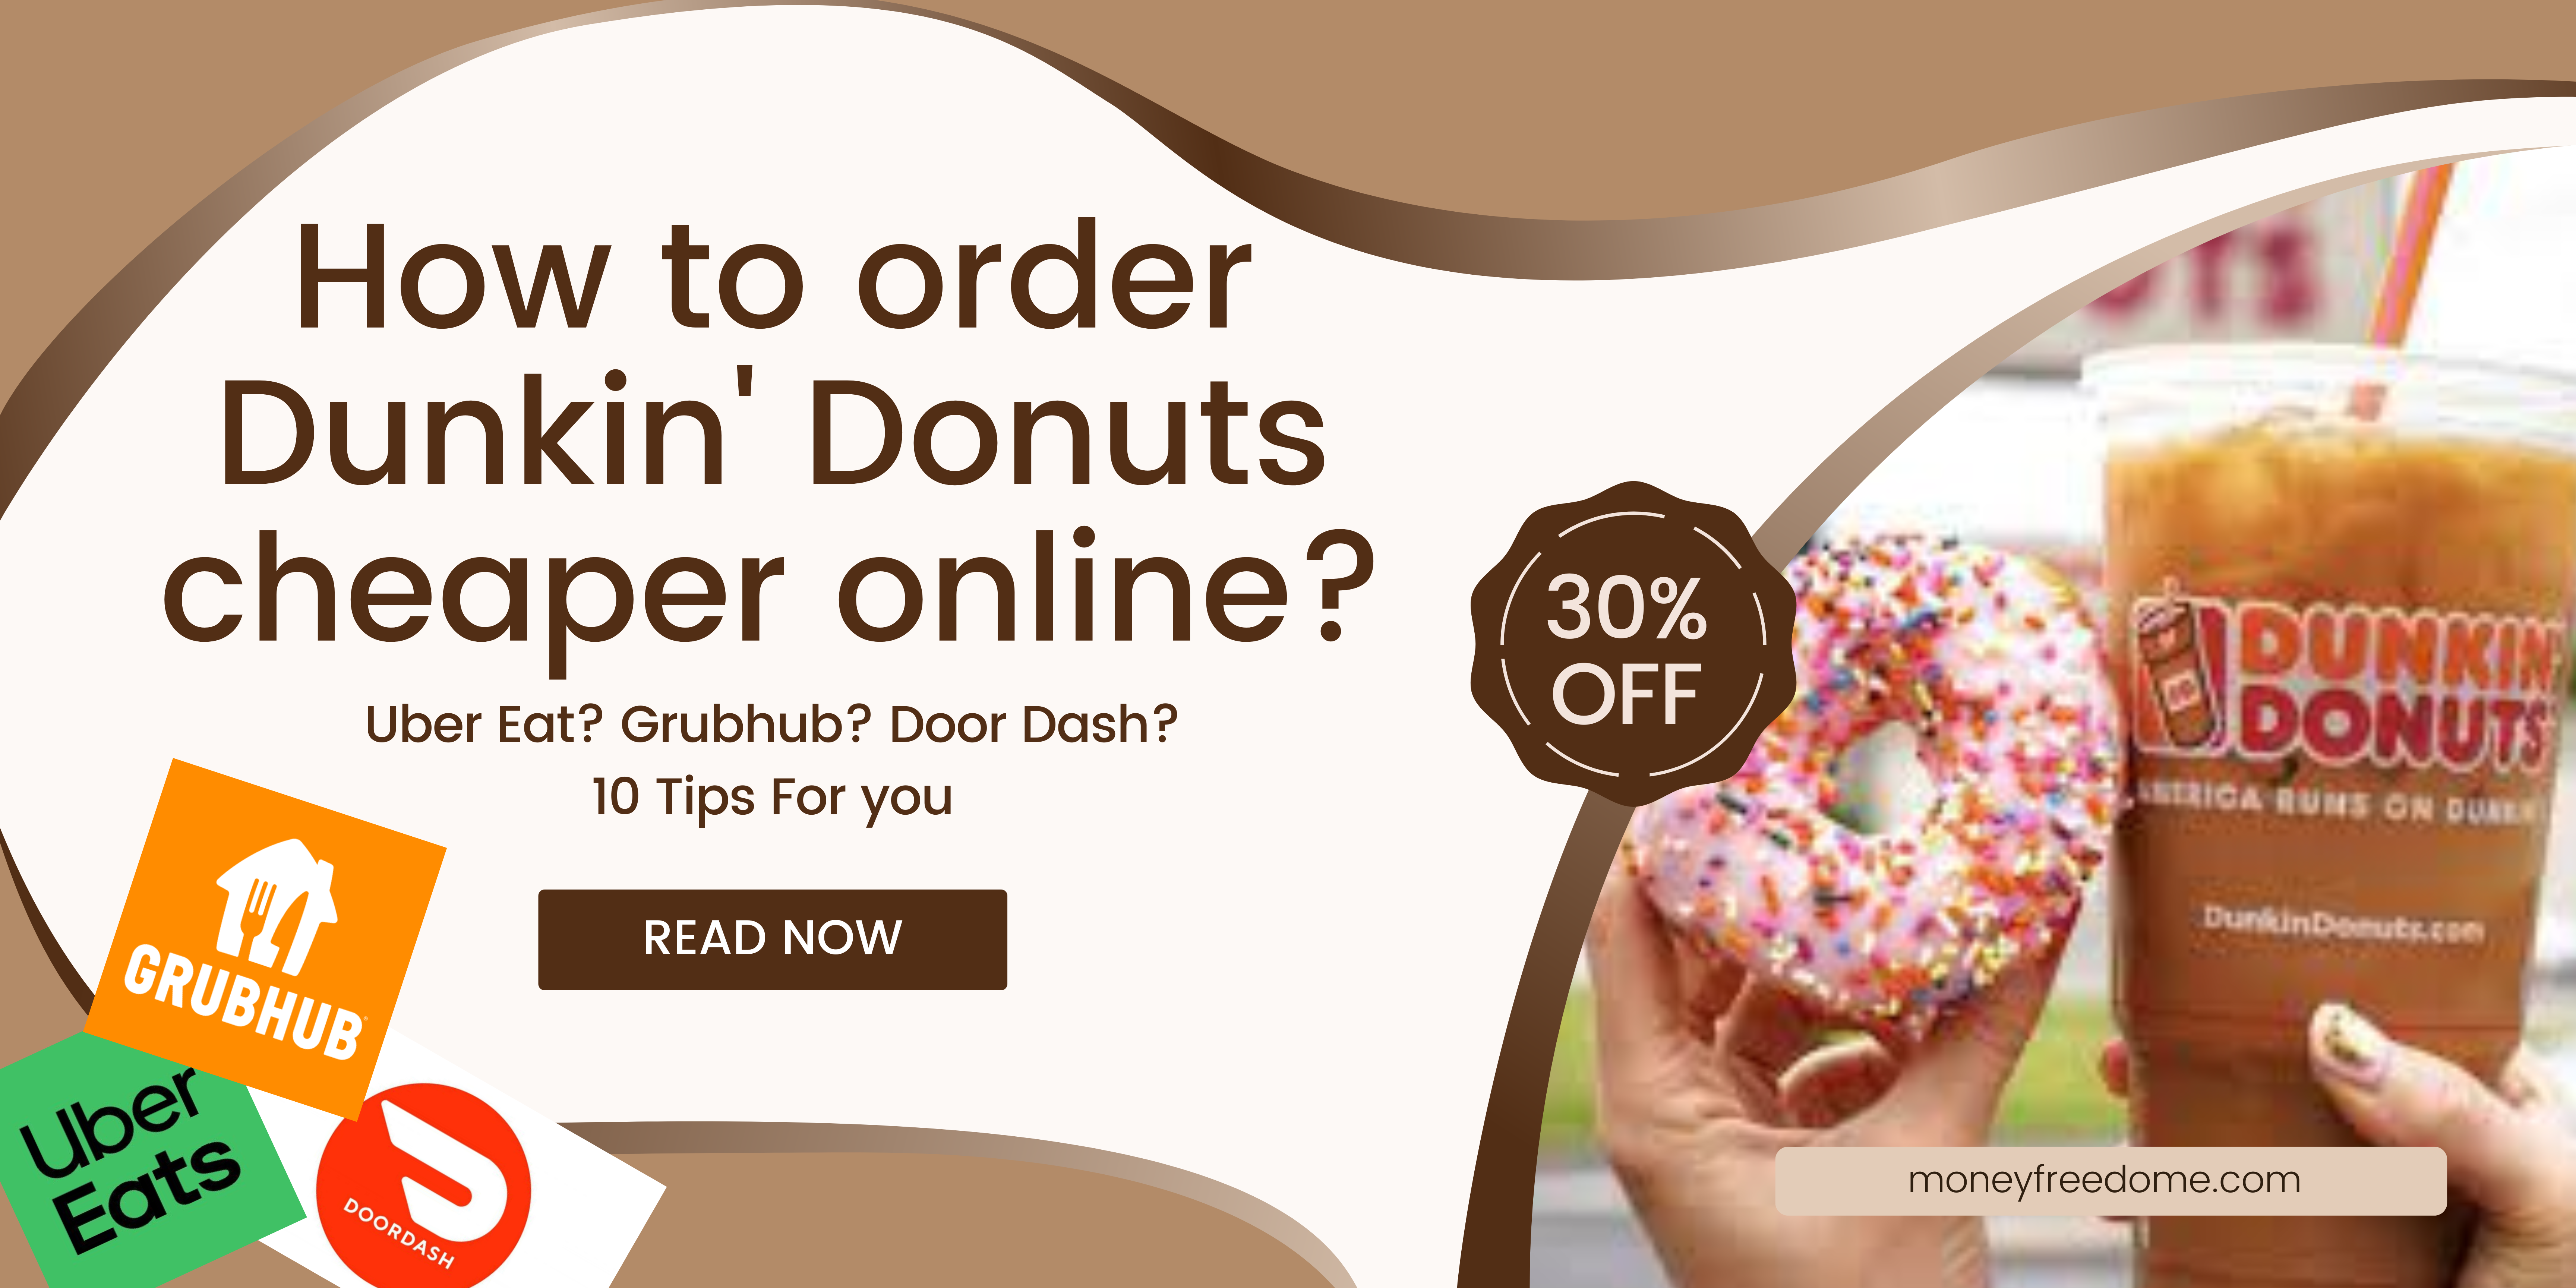 How to order Dunkin Donuts cheaper online 1